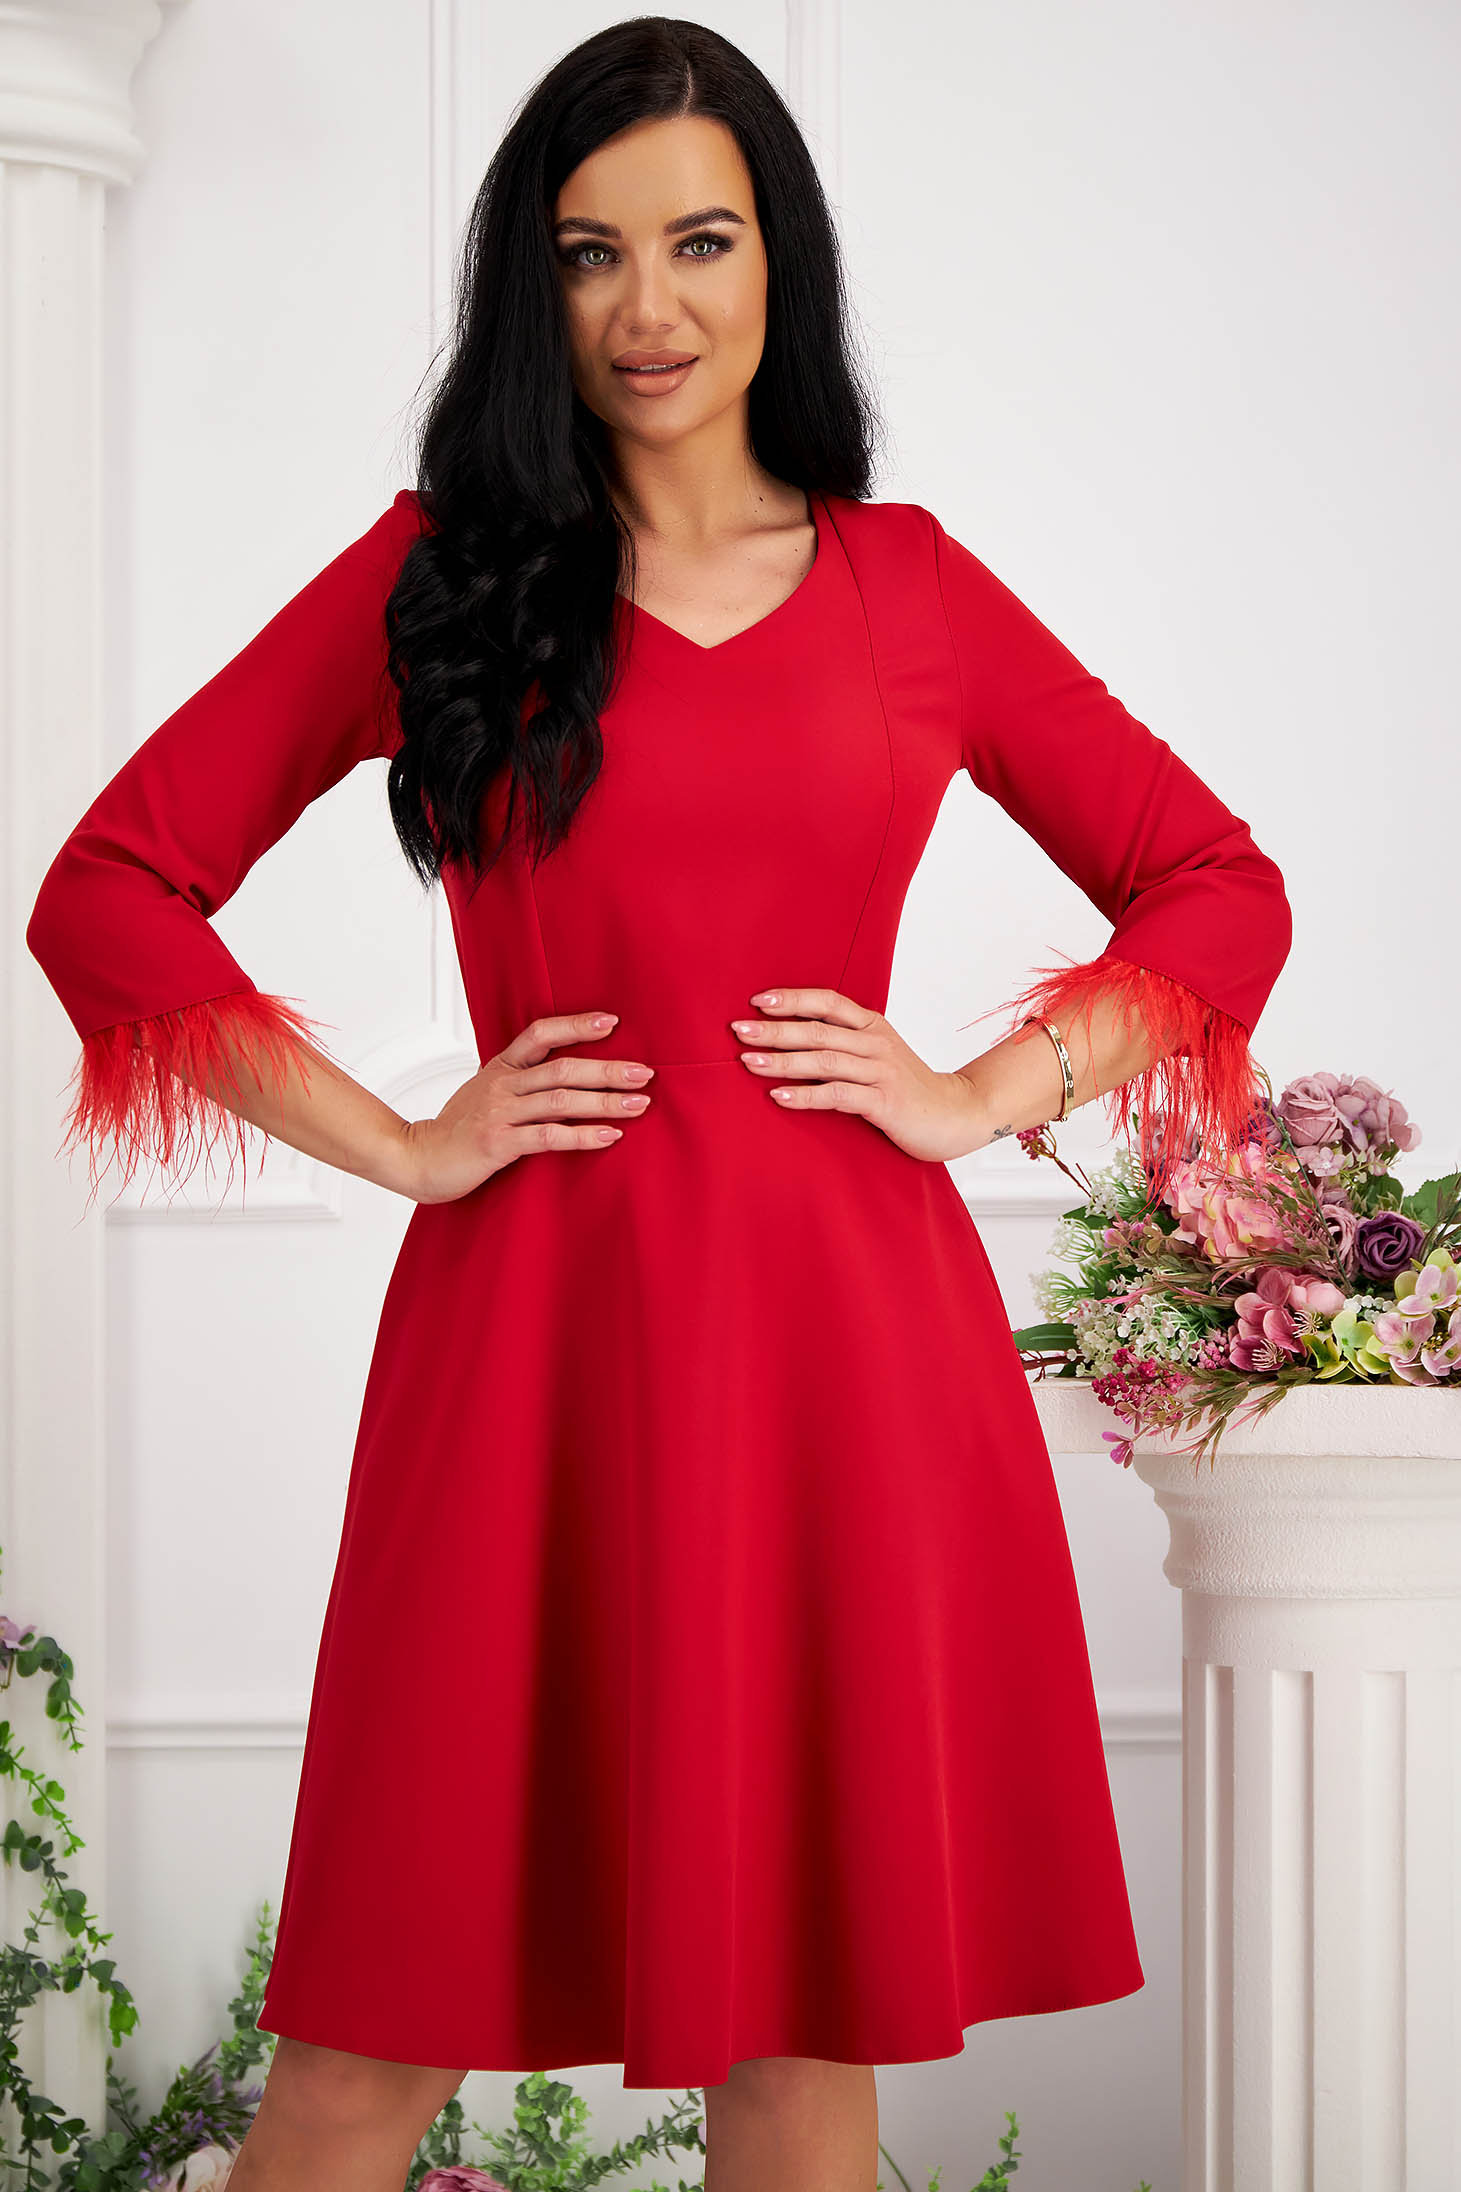 Red midi skater dress made of elastic fabric with side pockets and feathers